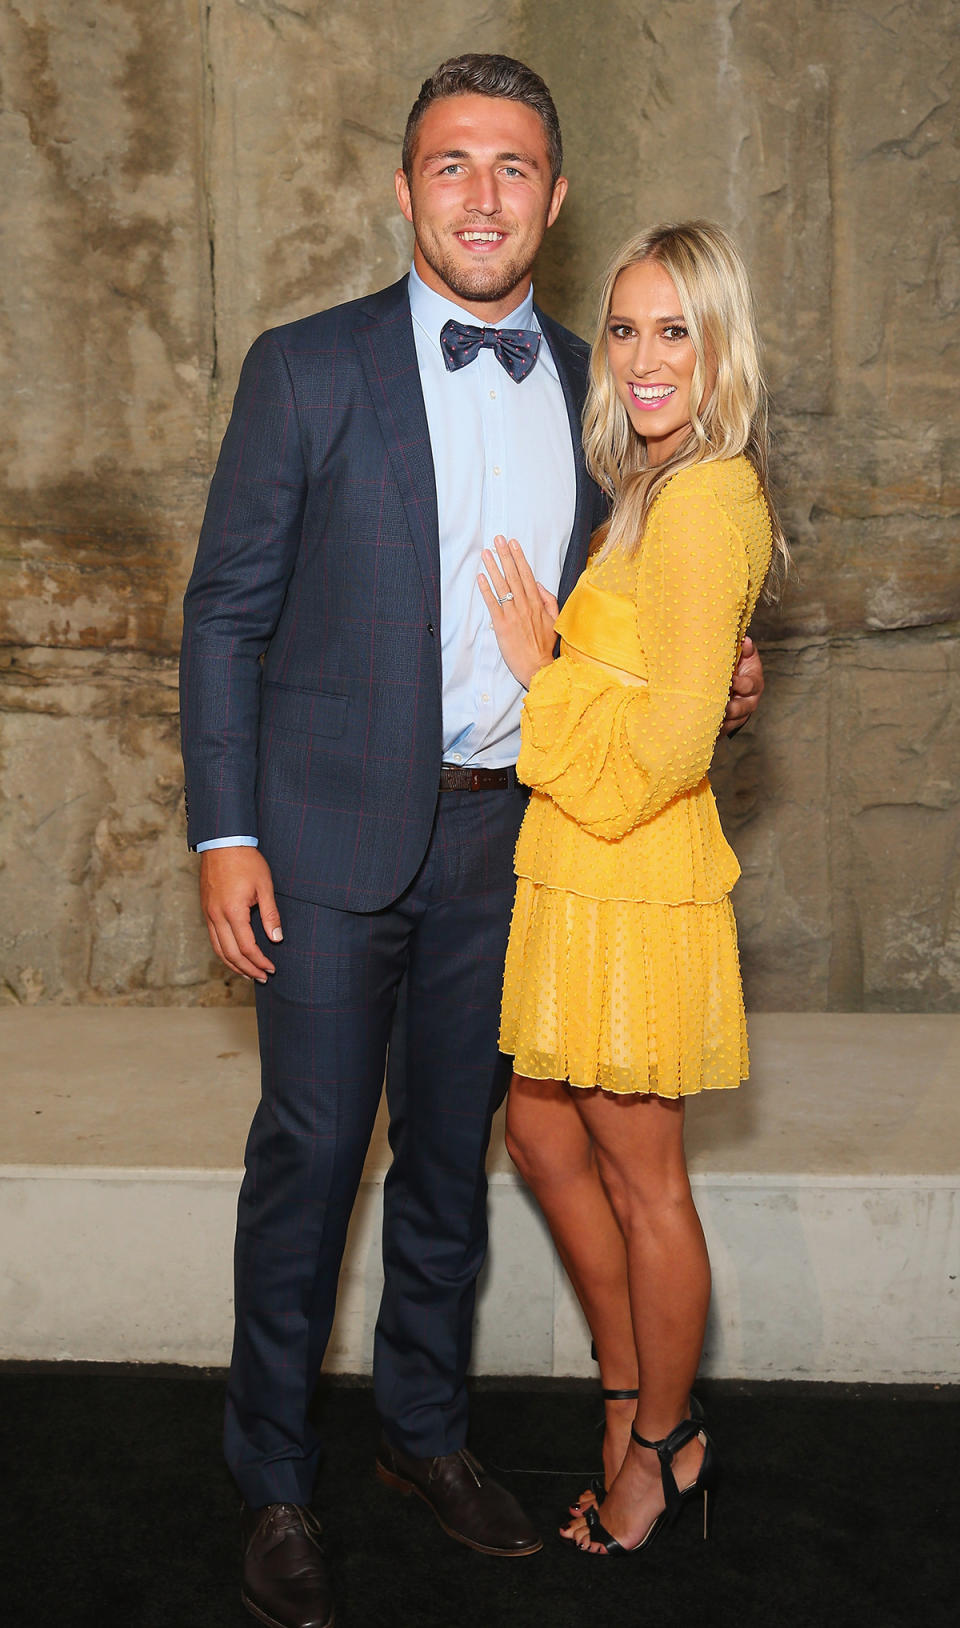 Sam Burgess and Phoebe Burgess at an event